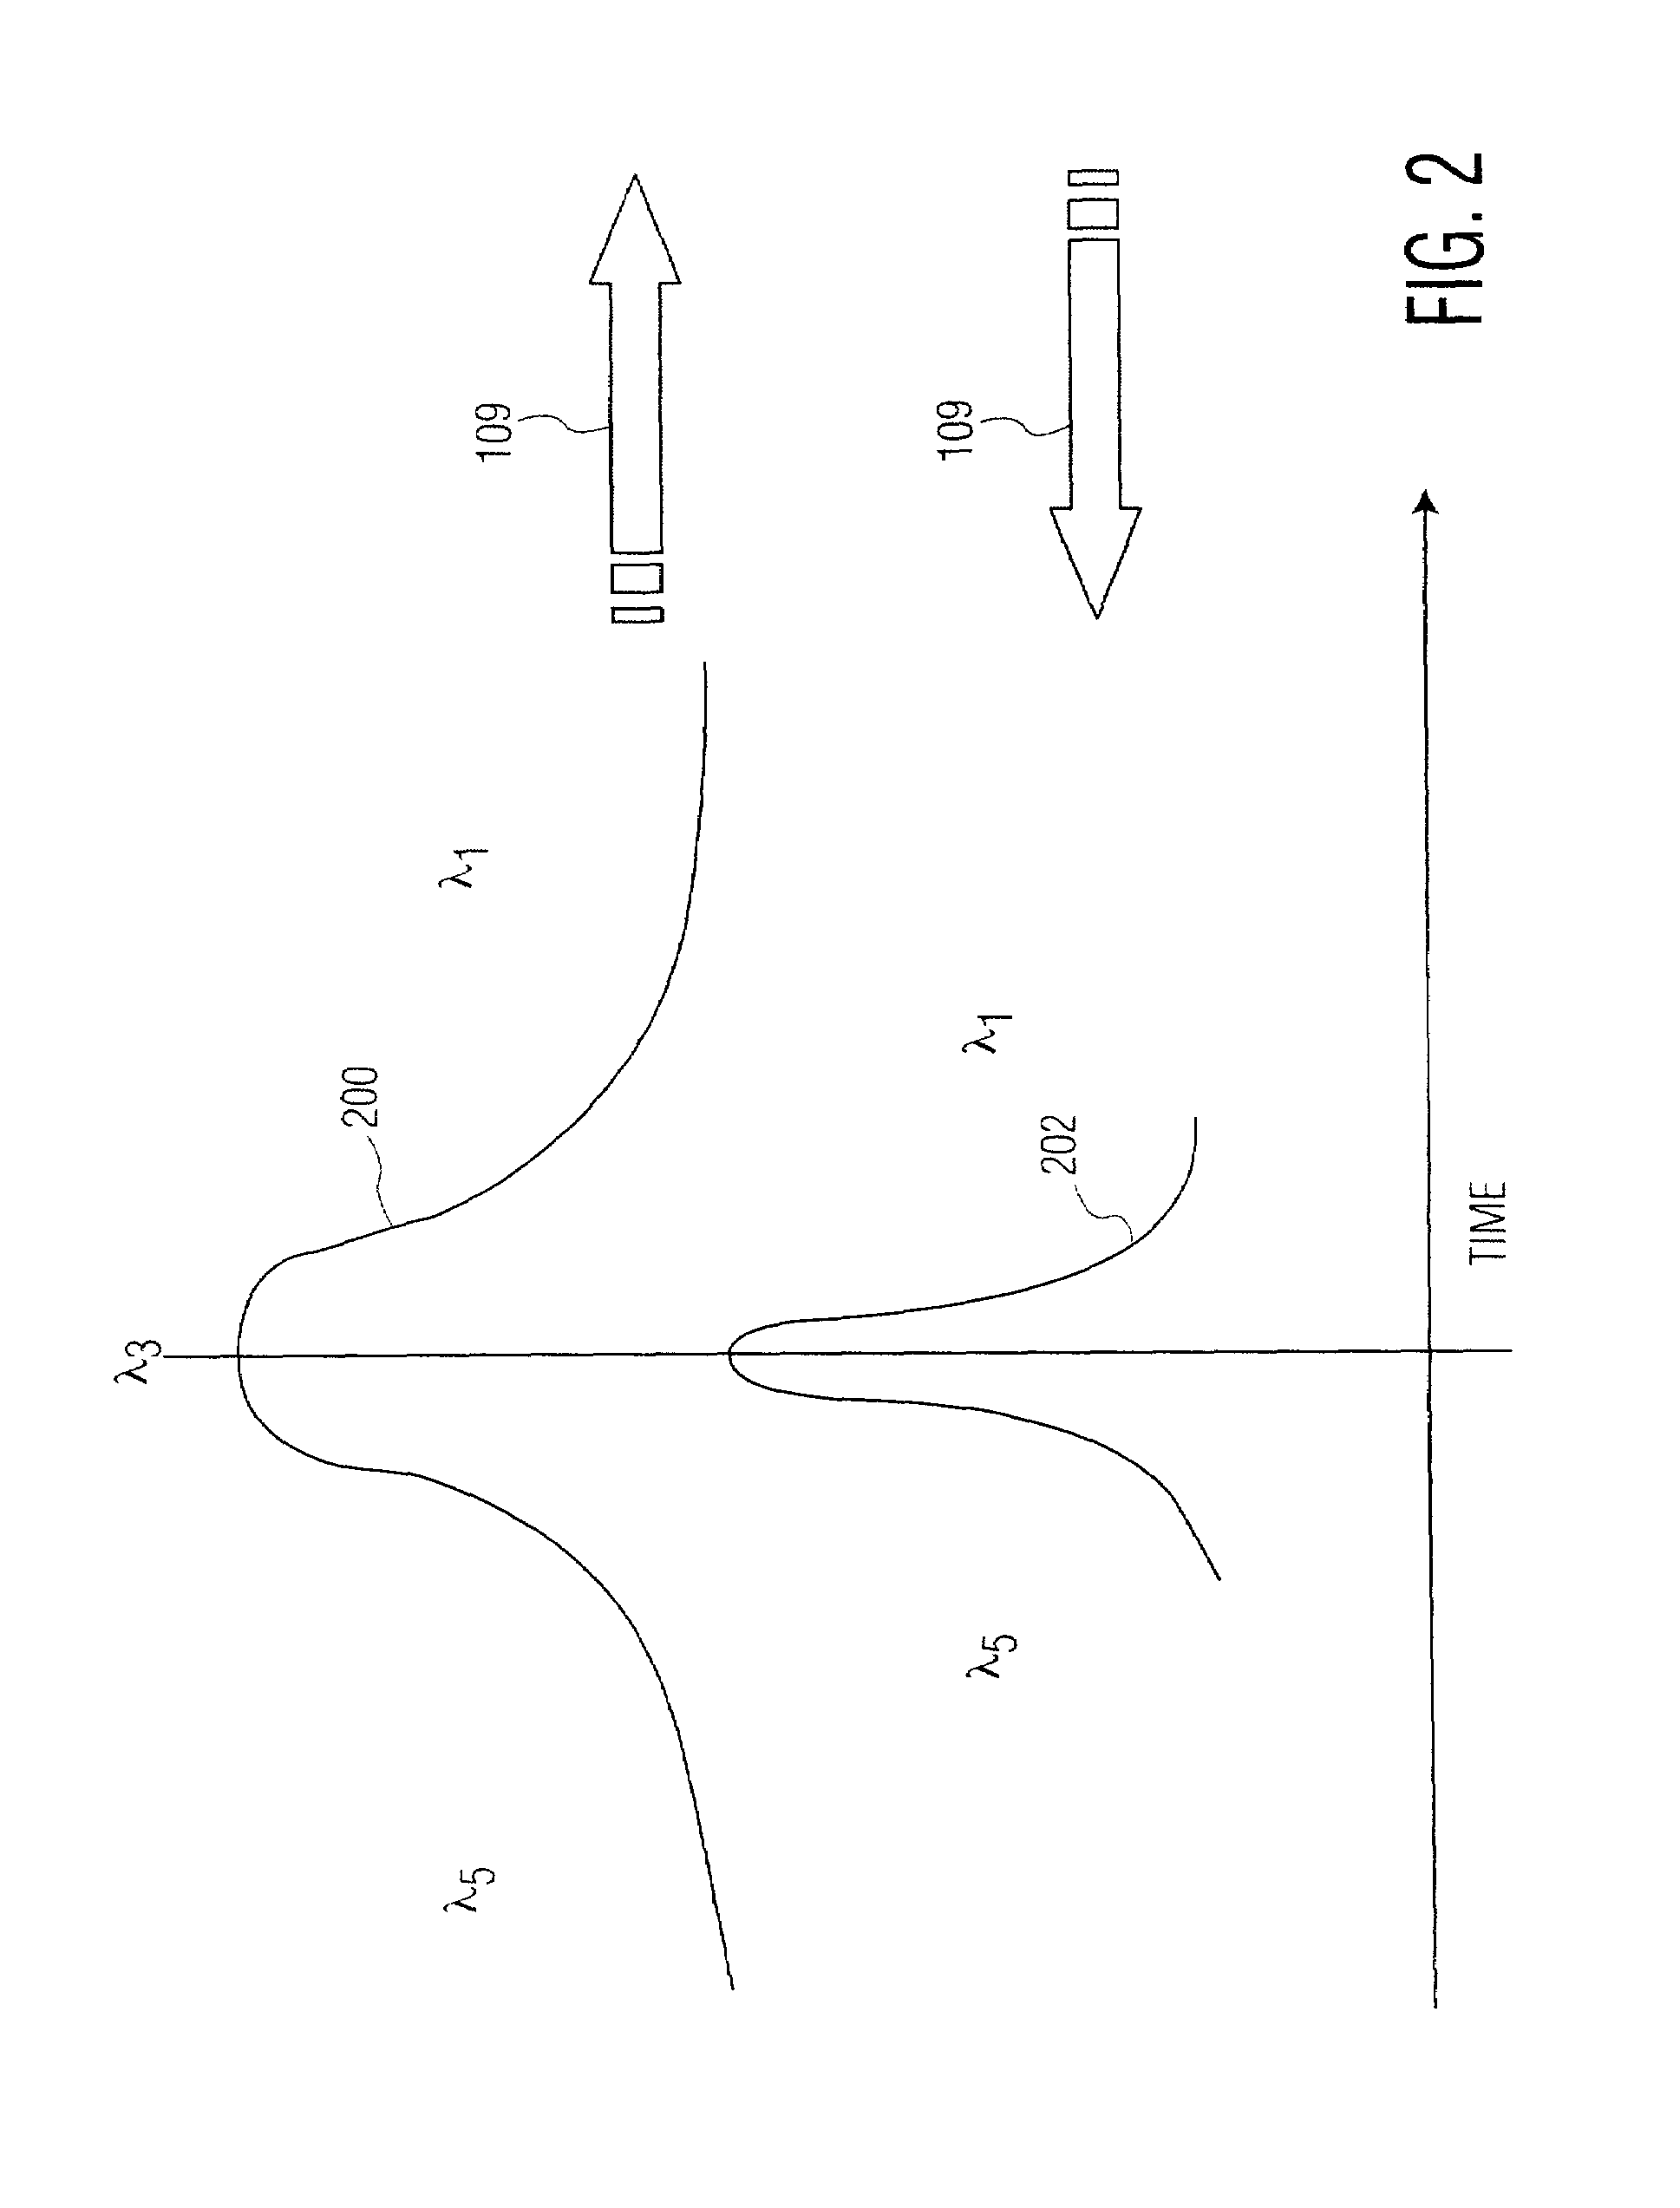 Grating dispersion compensator and method of manufacture